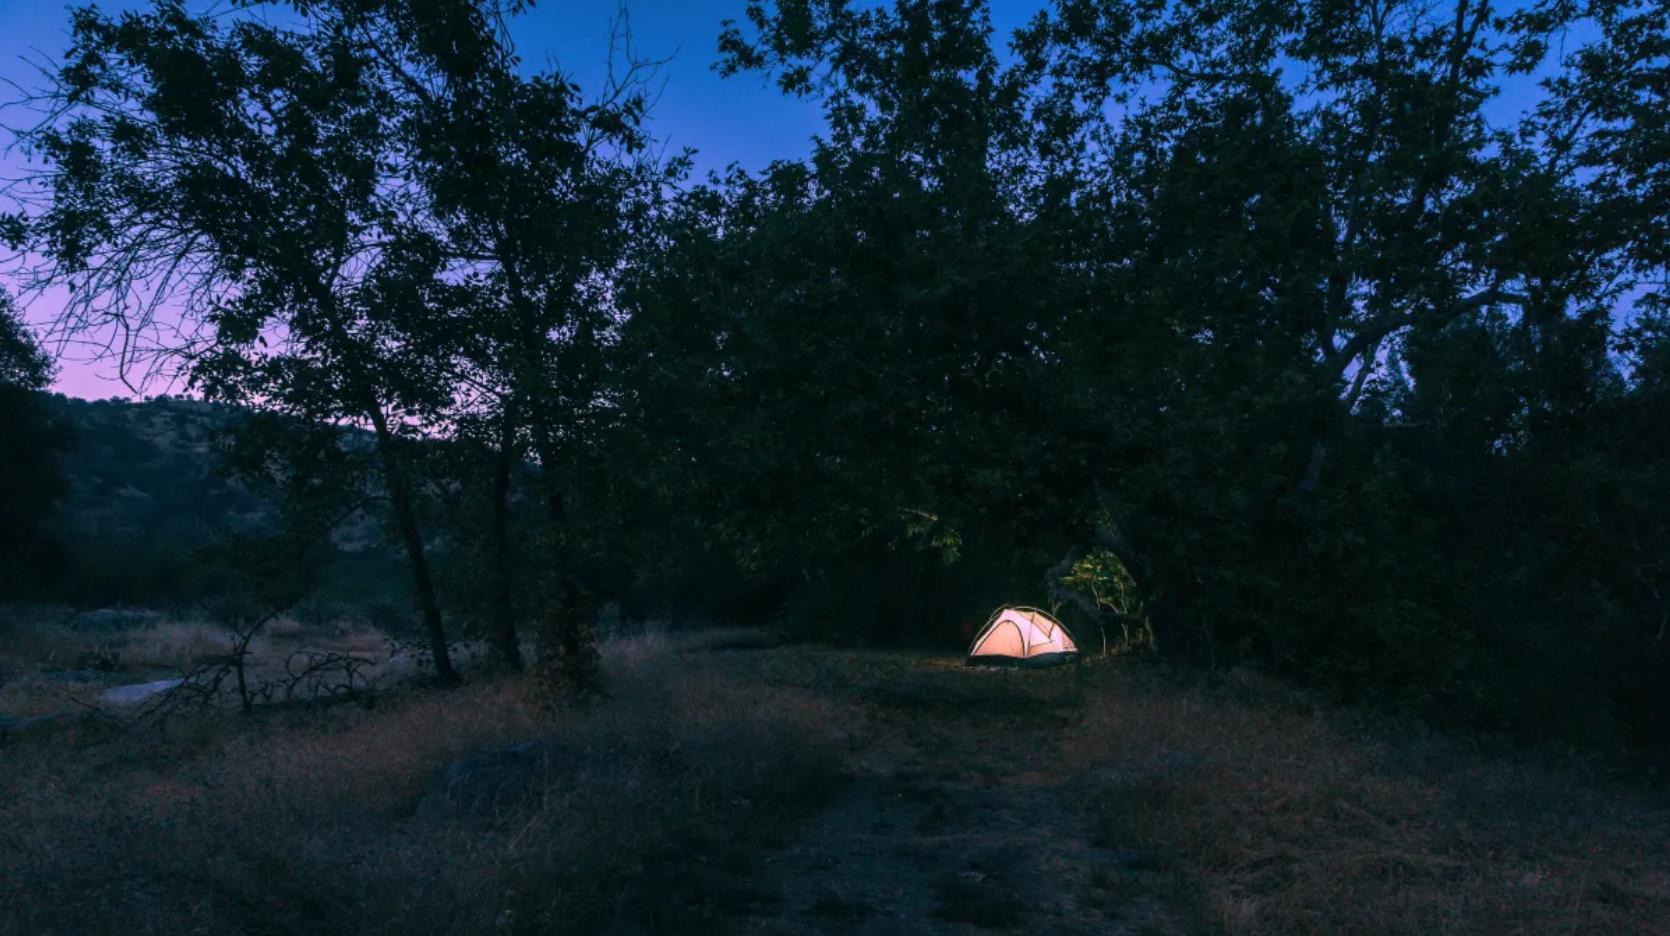 Another campsite at night